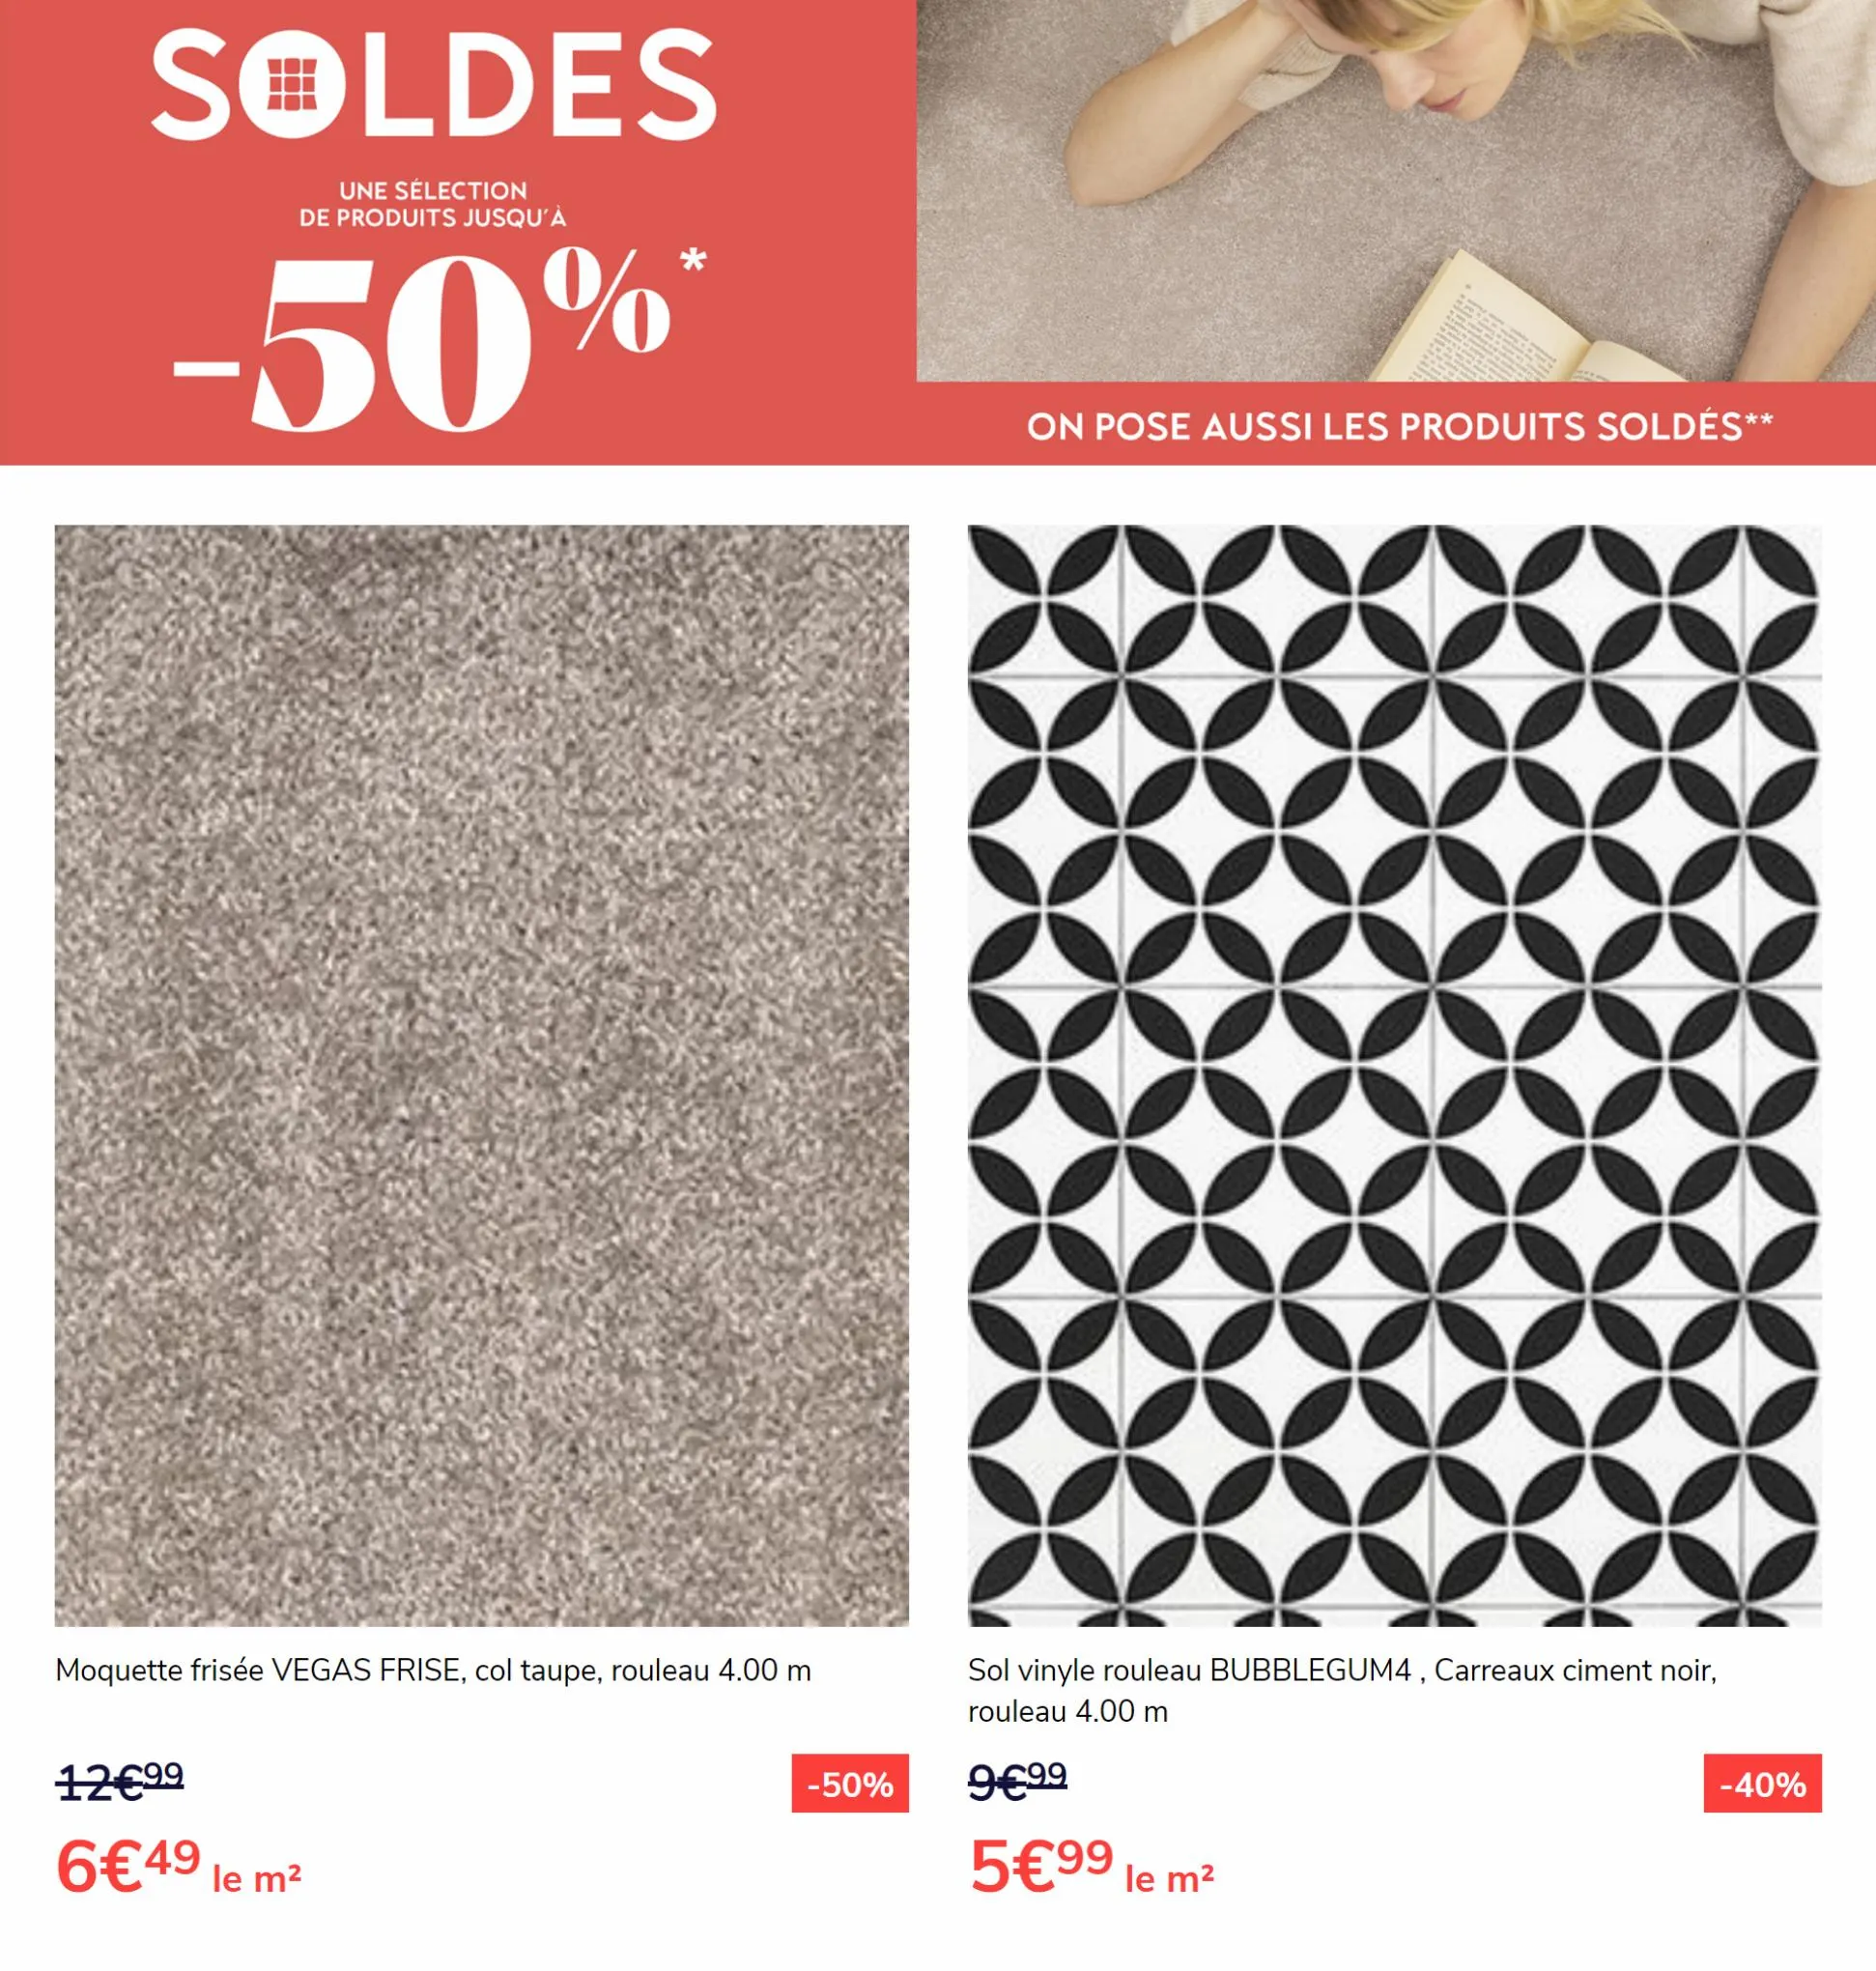 Catalogue SOLDES 50%, page 00005